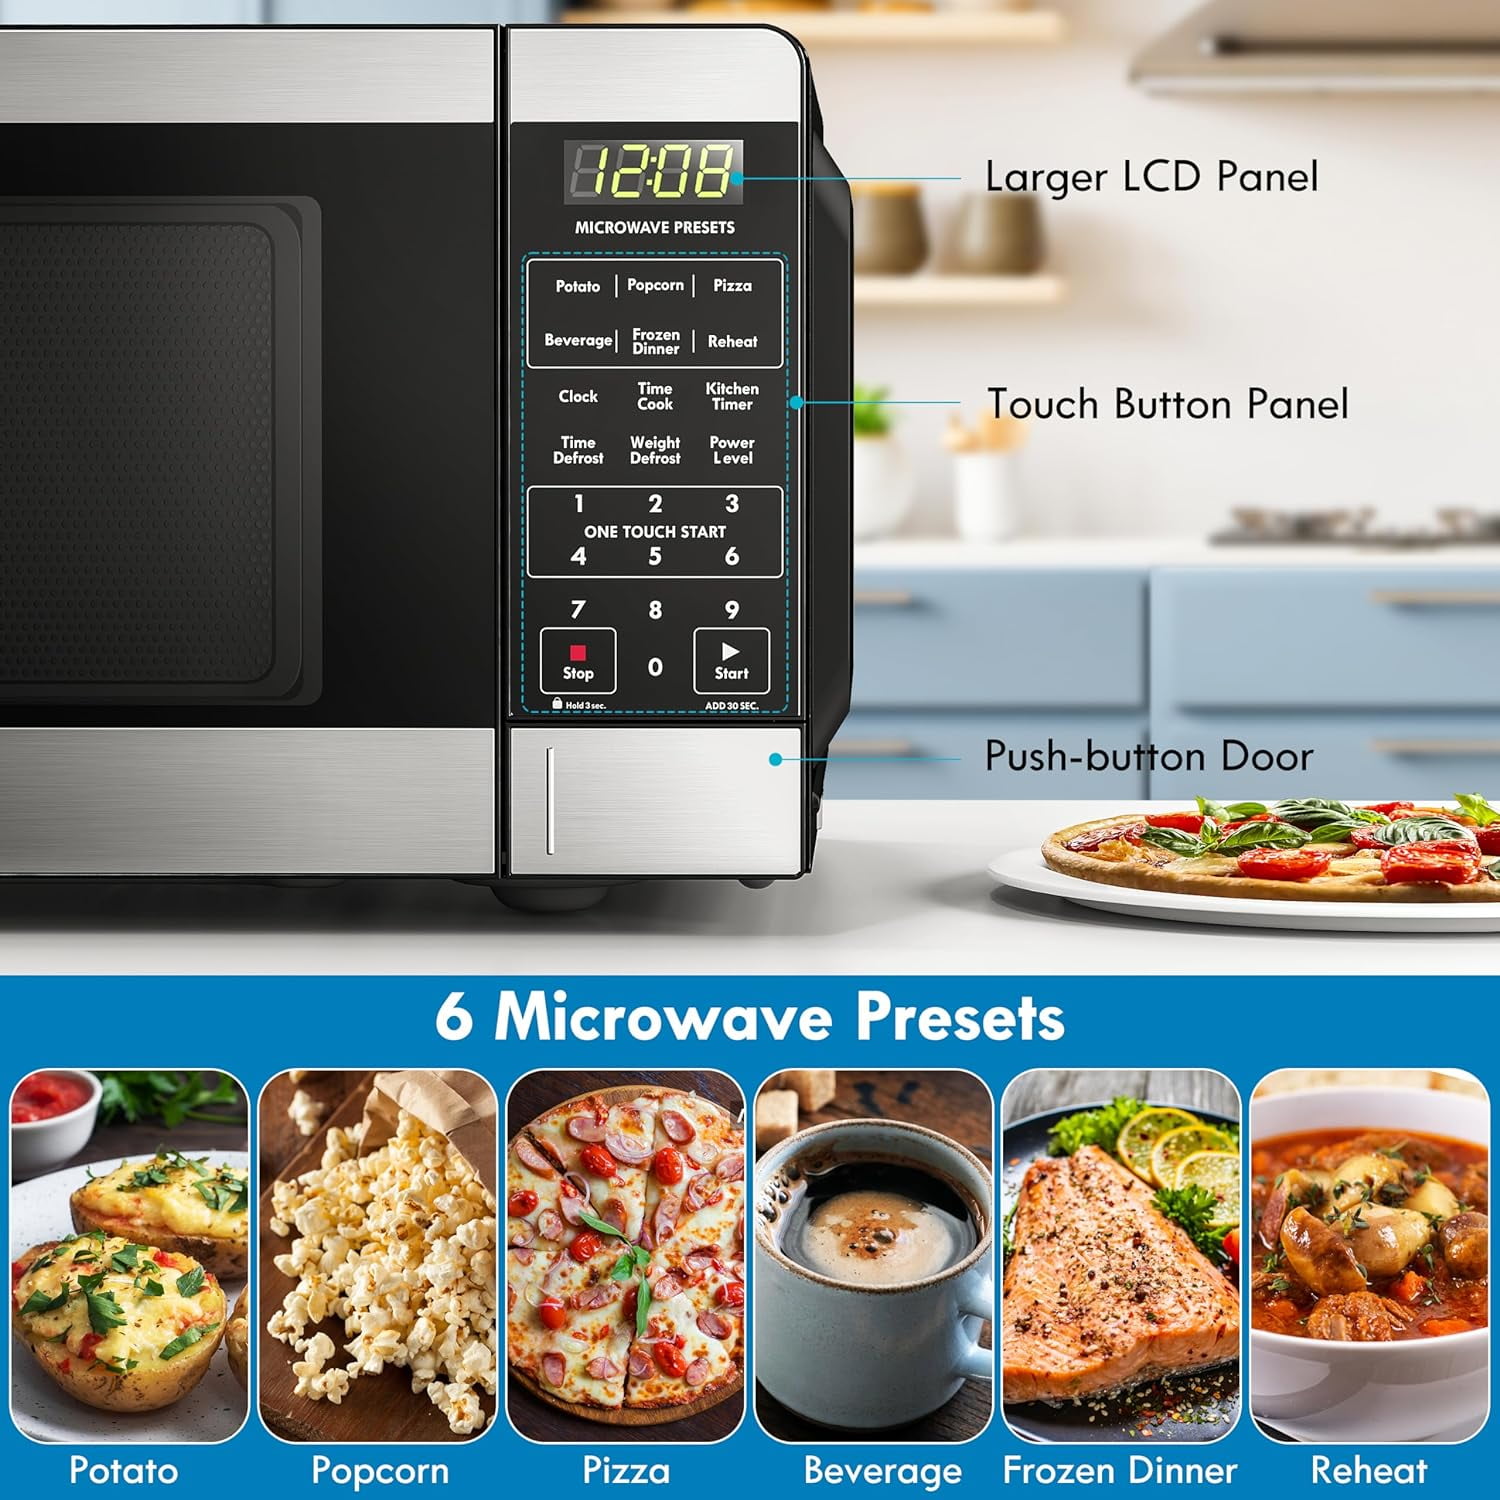 Kenmore Microwave 70929: Compact Microwave to Help You Cook in Minutes! –  Brunch 'n Bites